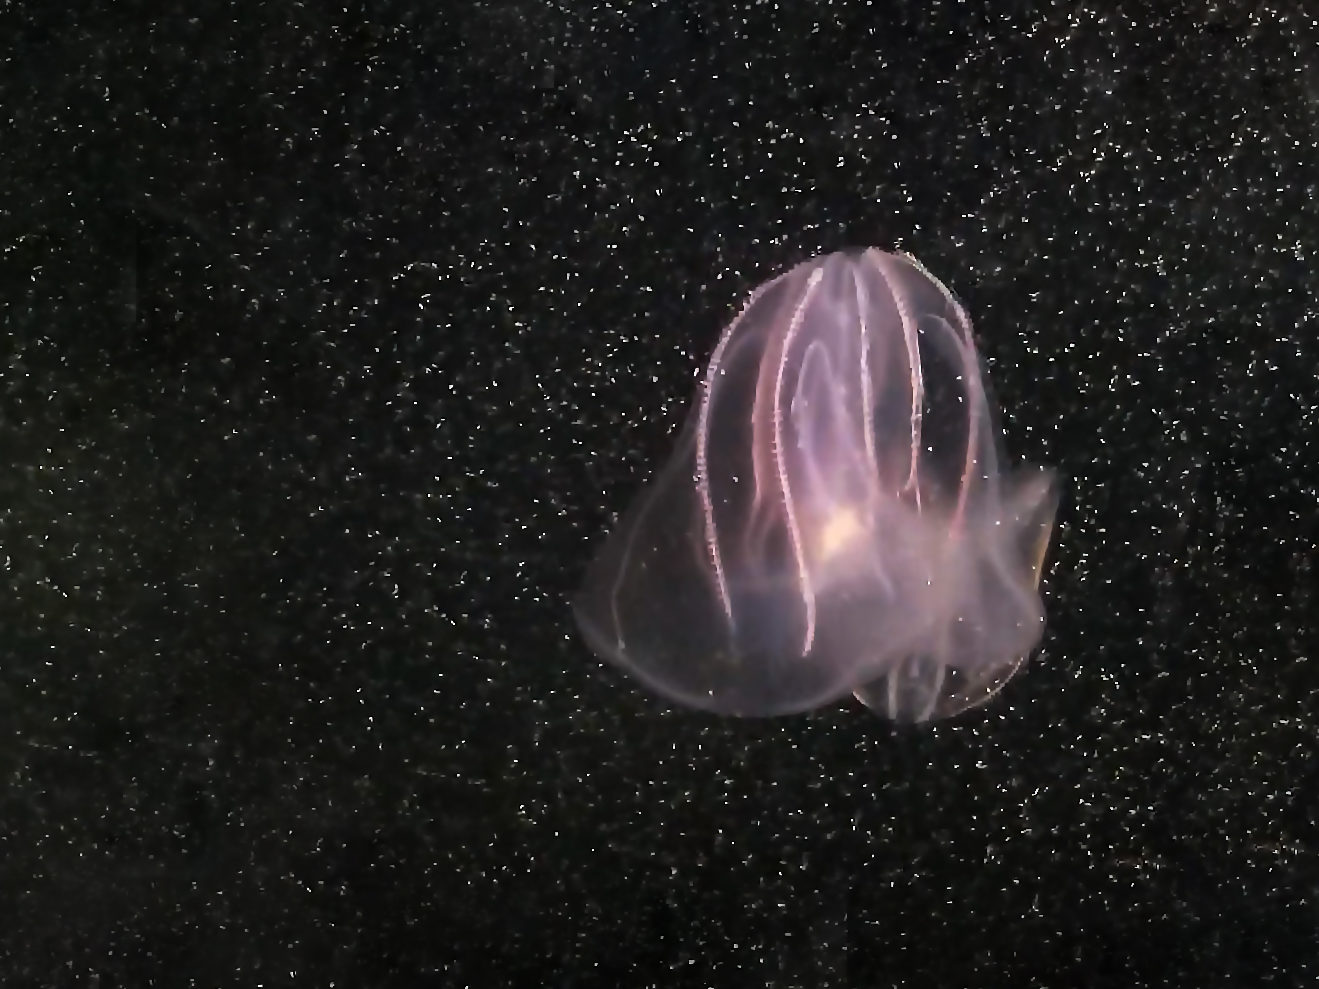 Comb jellyfish at feeding time